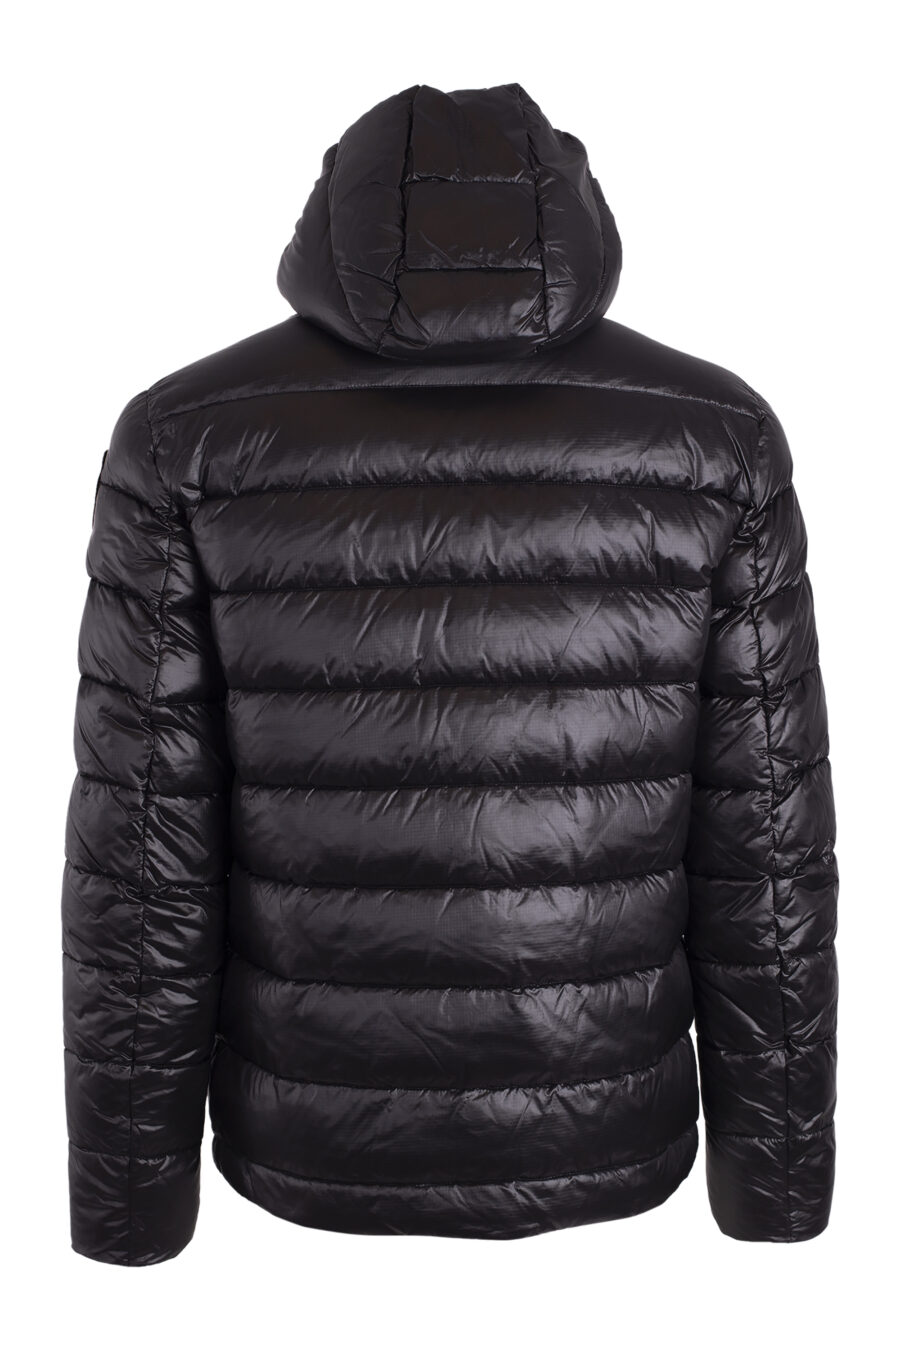 Black hooded jacket with straight lines and eco padding - IMG 4600